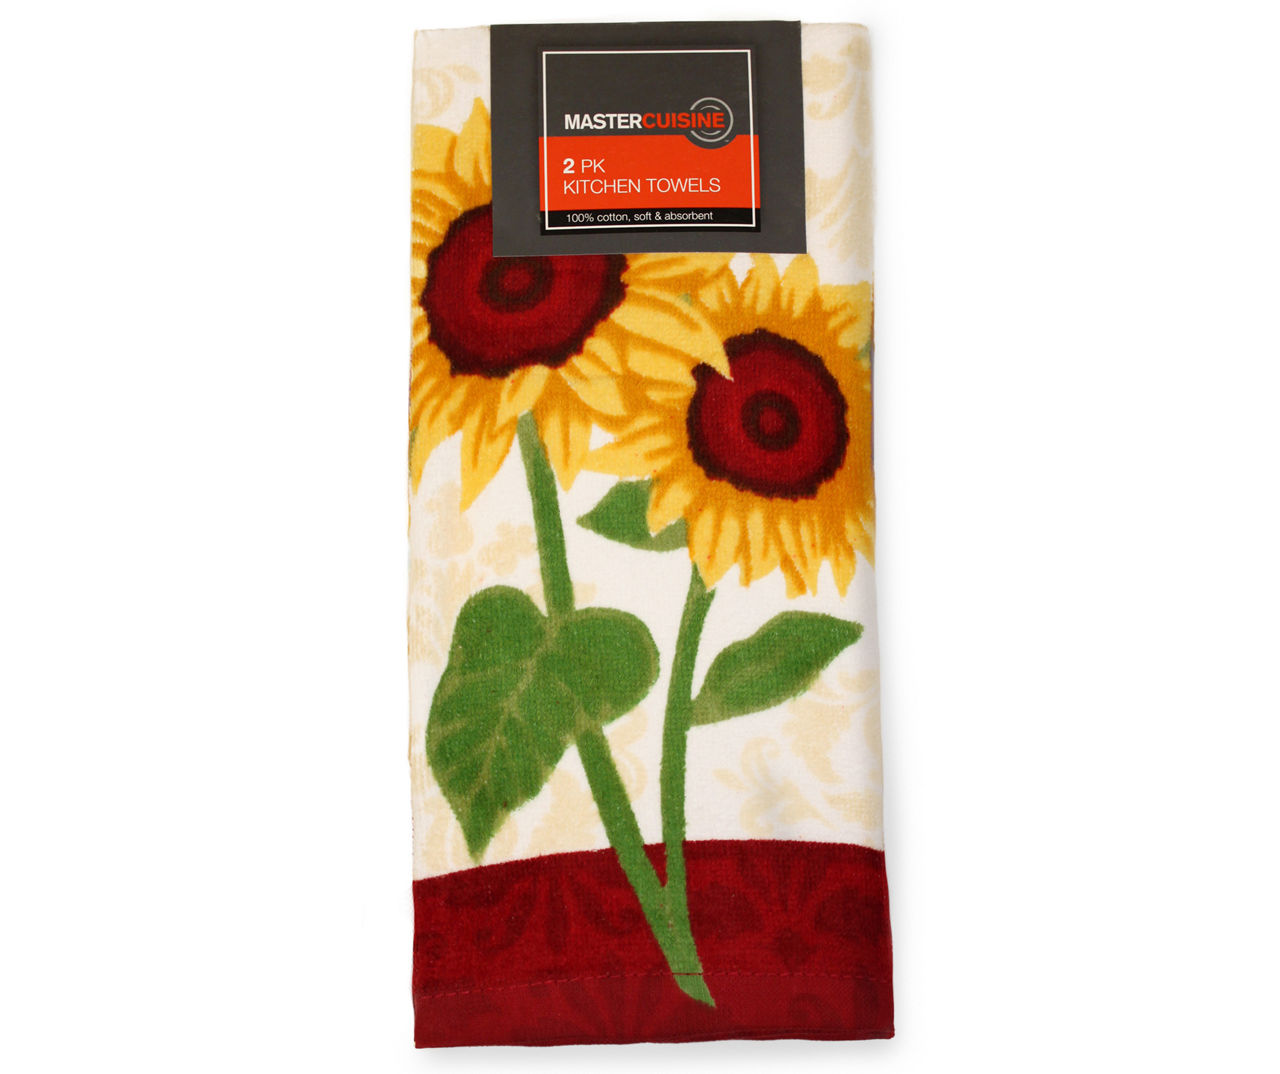 Kitchen Sunflower Dishtowel and Oven Mitts Set, Sunflower Kitchen Décor  and Accessories, Sunflower Tea Towels with Oven Mitts and Pot Holders Sets